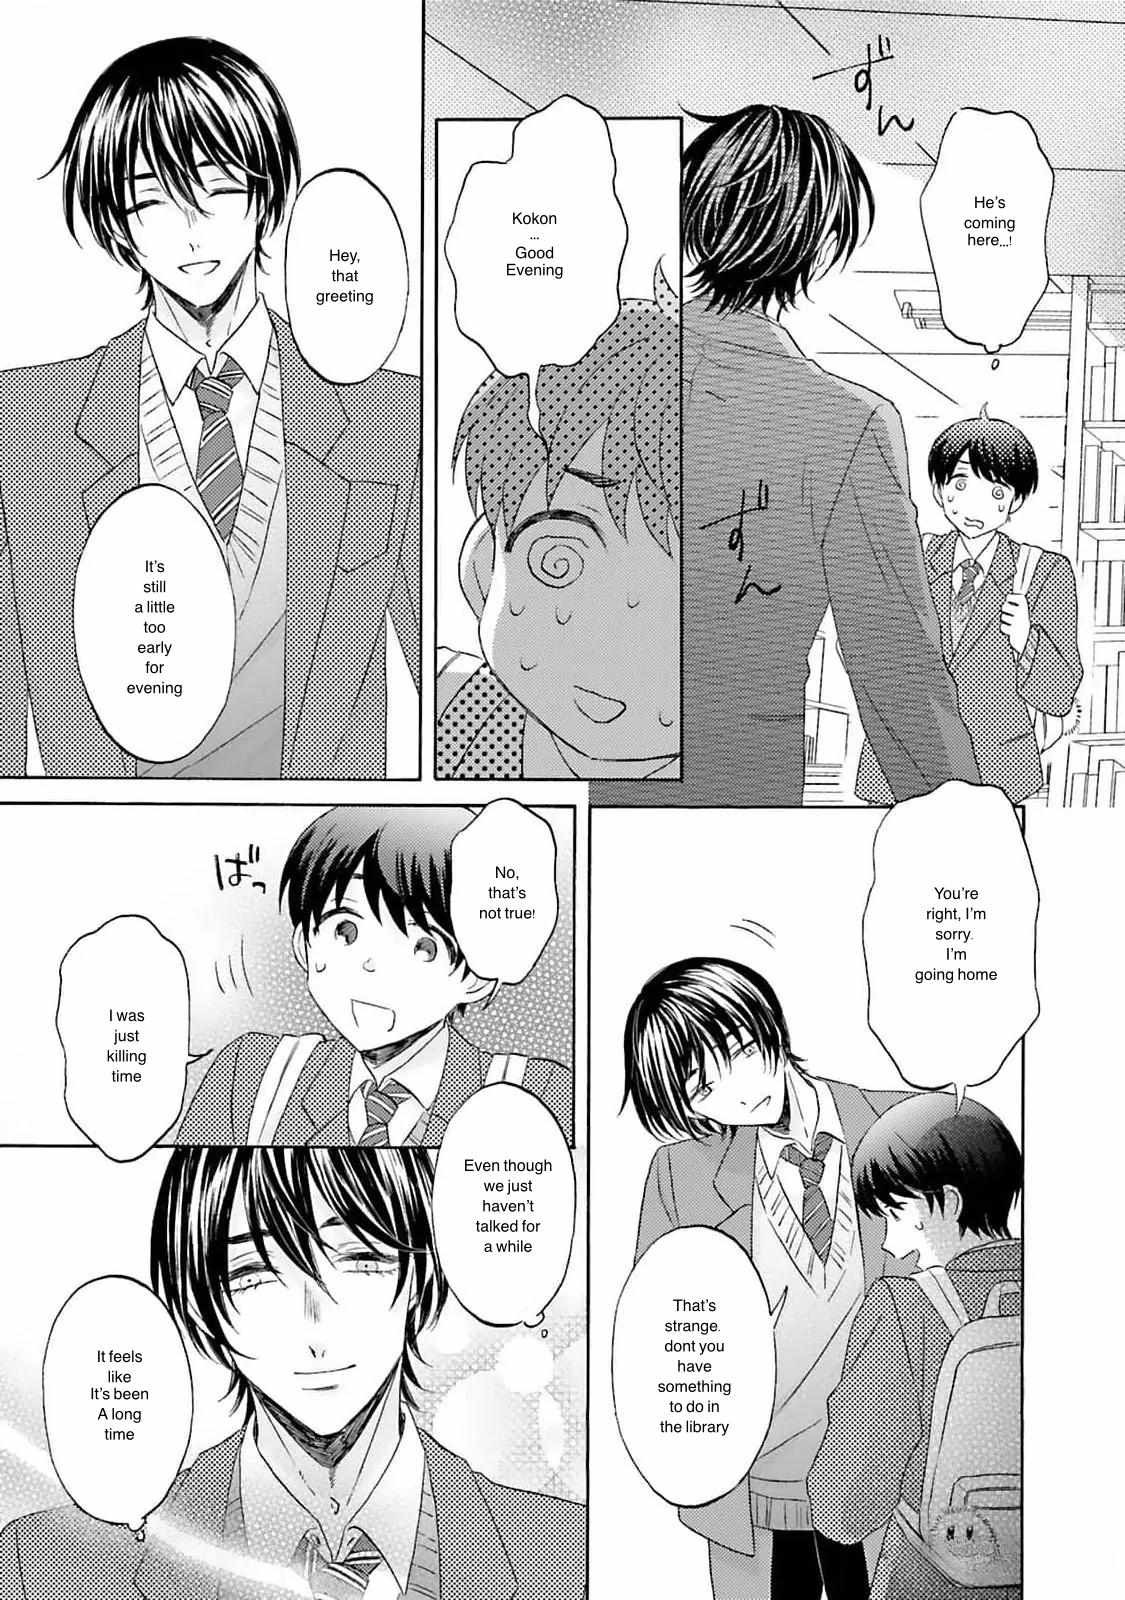 My Cutie Pie -An Ordinary Boy And His Gorgeous Childhood Friend- 〘Official〙 - 4 page 13-704360c5